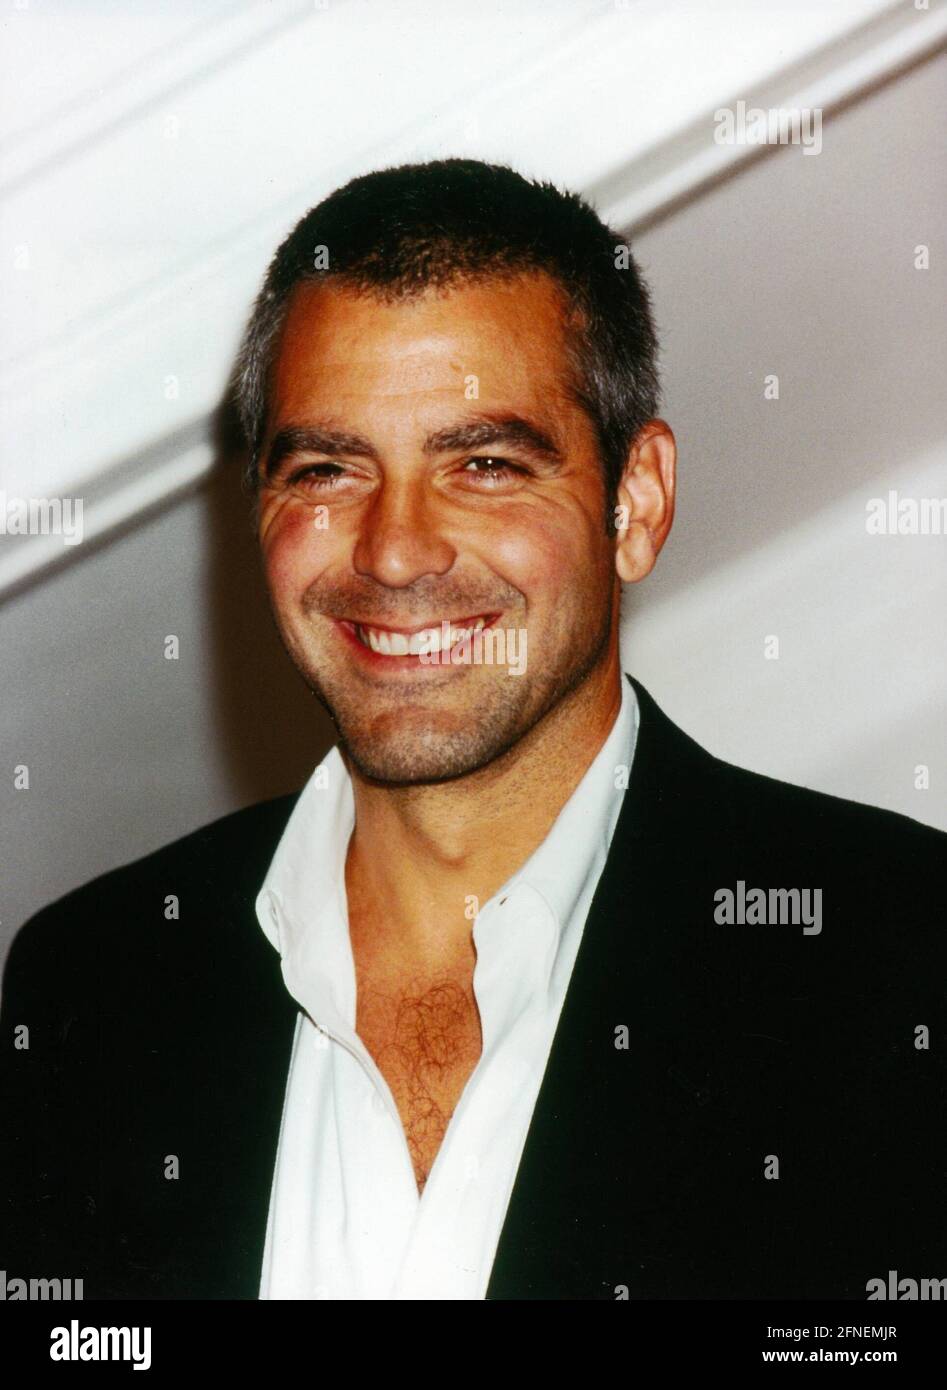 George Clooney, US film actor. He became known through the TV series 'ER-Emergency nRoom' in the role of 'Dr. Douglas Ross'. He also appeared in the films 'From Dusk Till Dawn', 'Batman and Robin' and 'Days Like This...'. [automated translation] Stock Photo